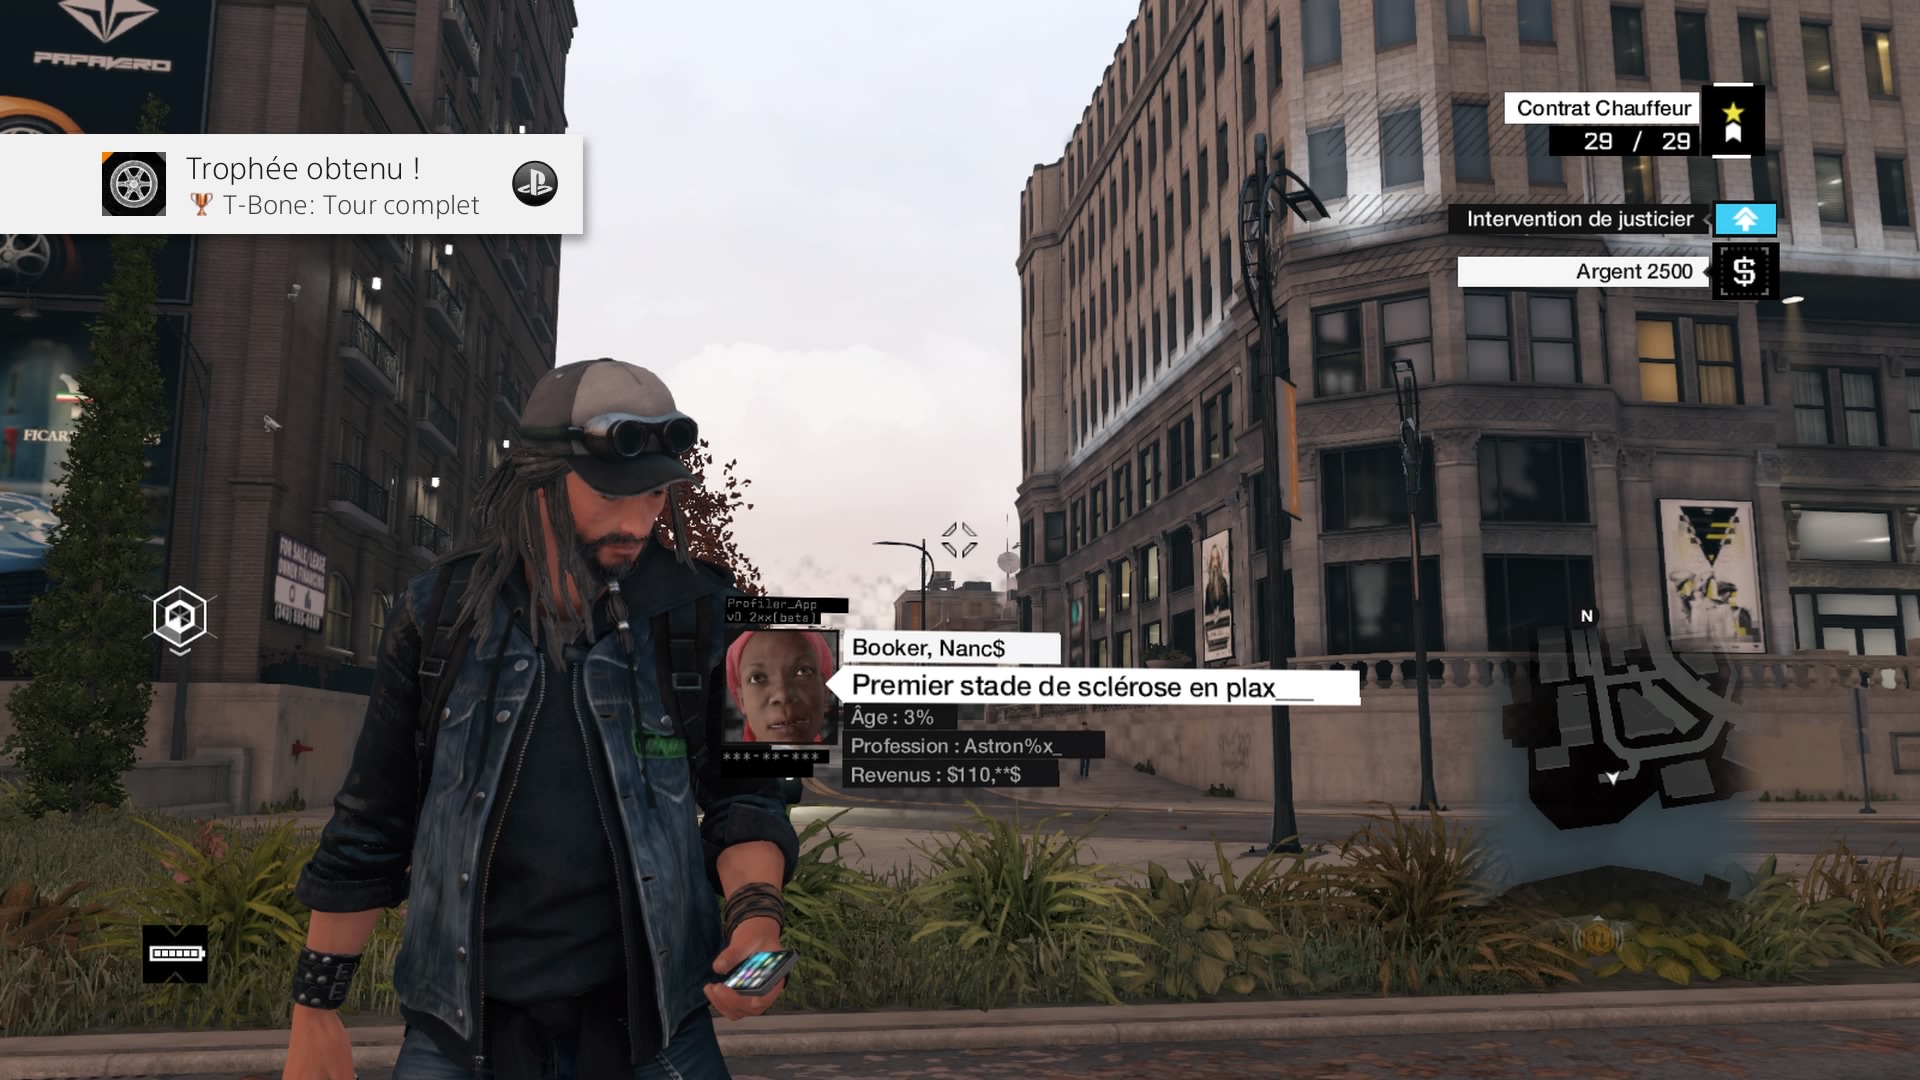 Watch Dogs Bad Blood DLC T-Bone : Tour complet